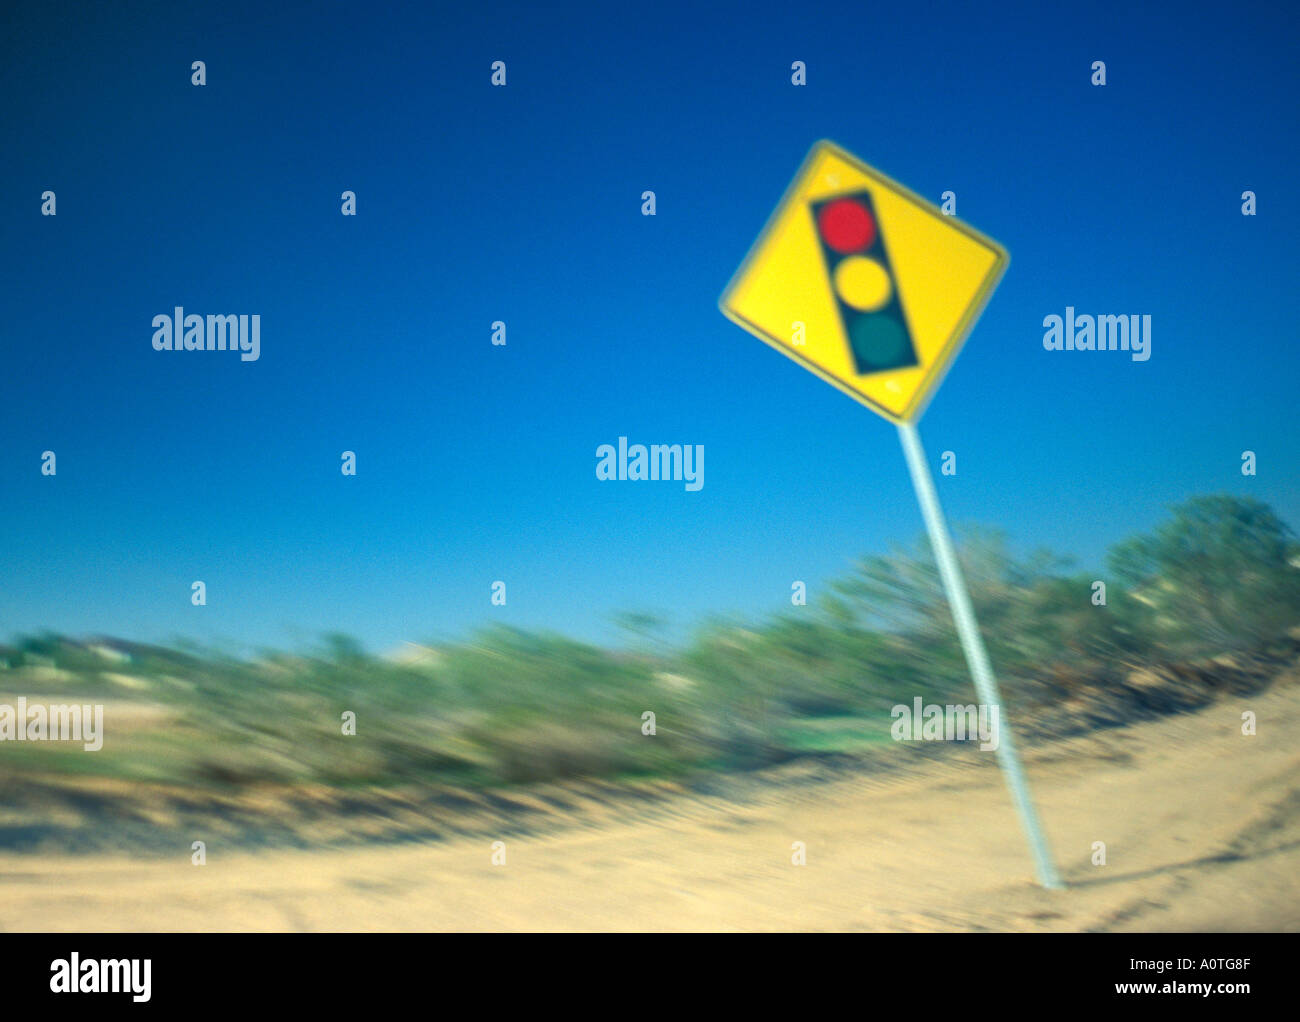 Blurry distorted photo of traffic lights ahead warning sign Stock Photo